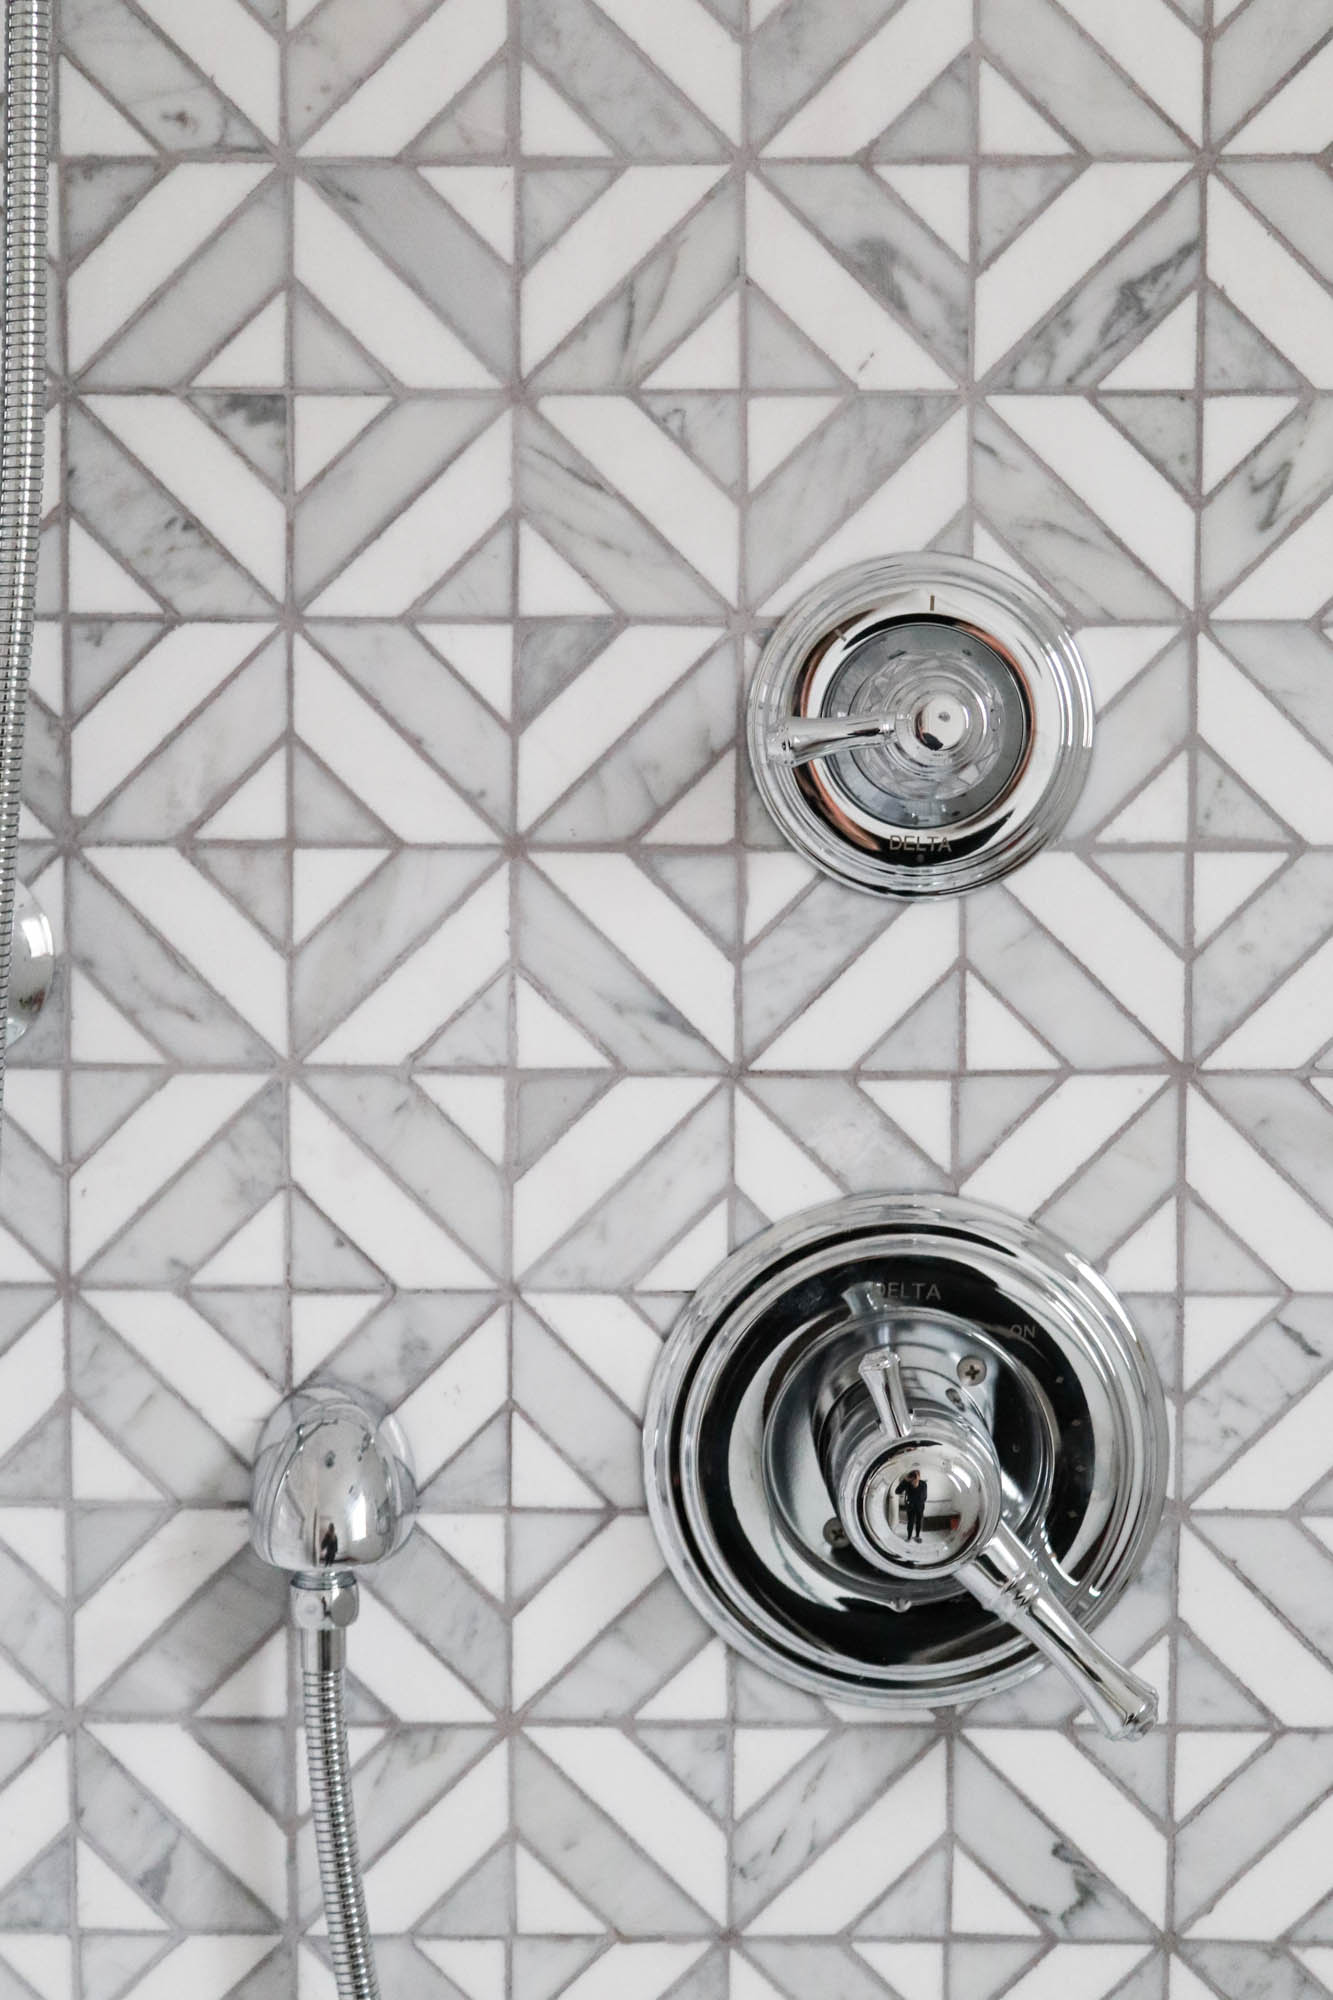 A picture of the shower tile and plumbing fixtures.